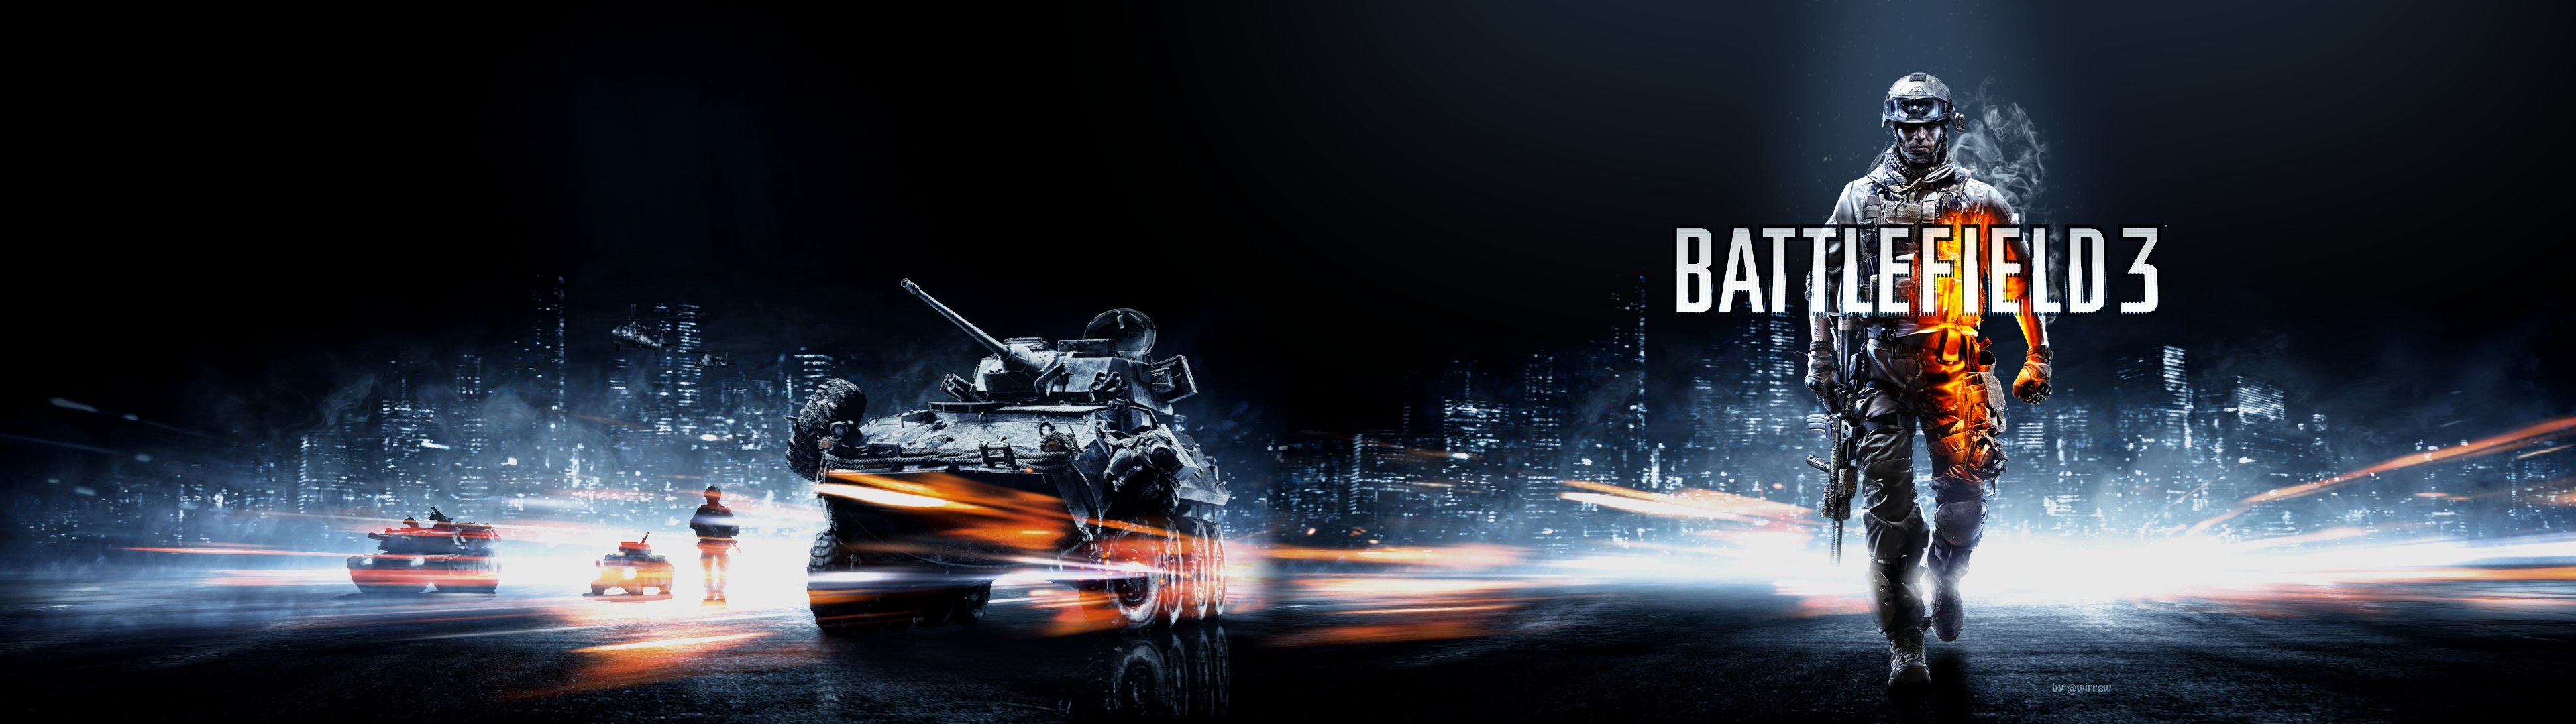 battlefield, Shooter, Tactical, Military, Action, Fighting, Warrior, Futuristic, Sci fi, Poster Wallpaper